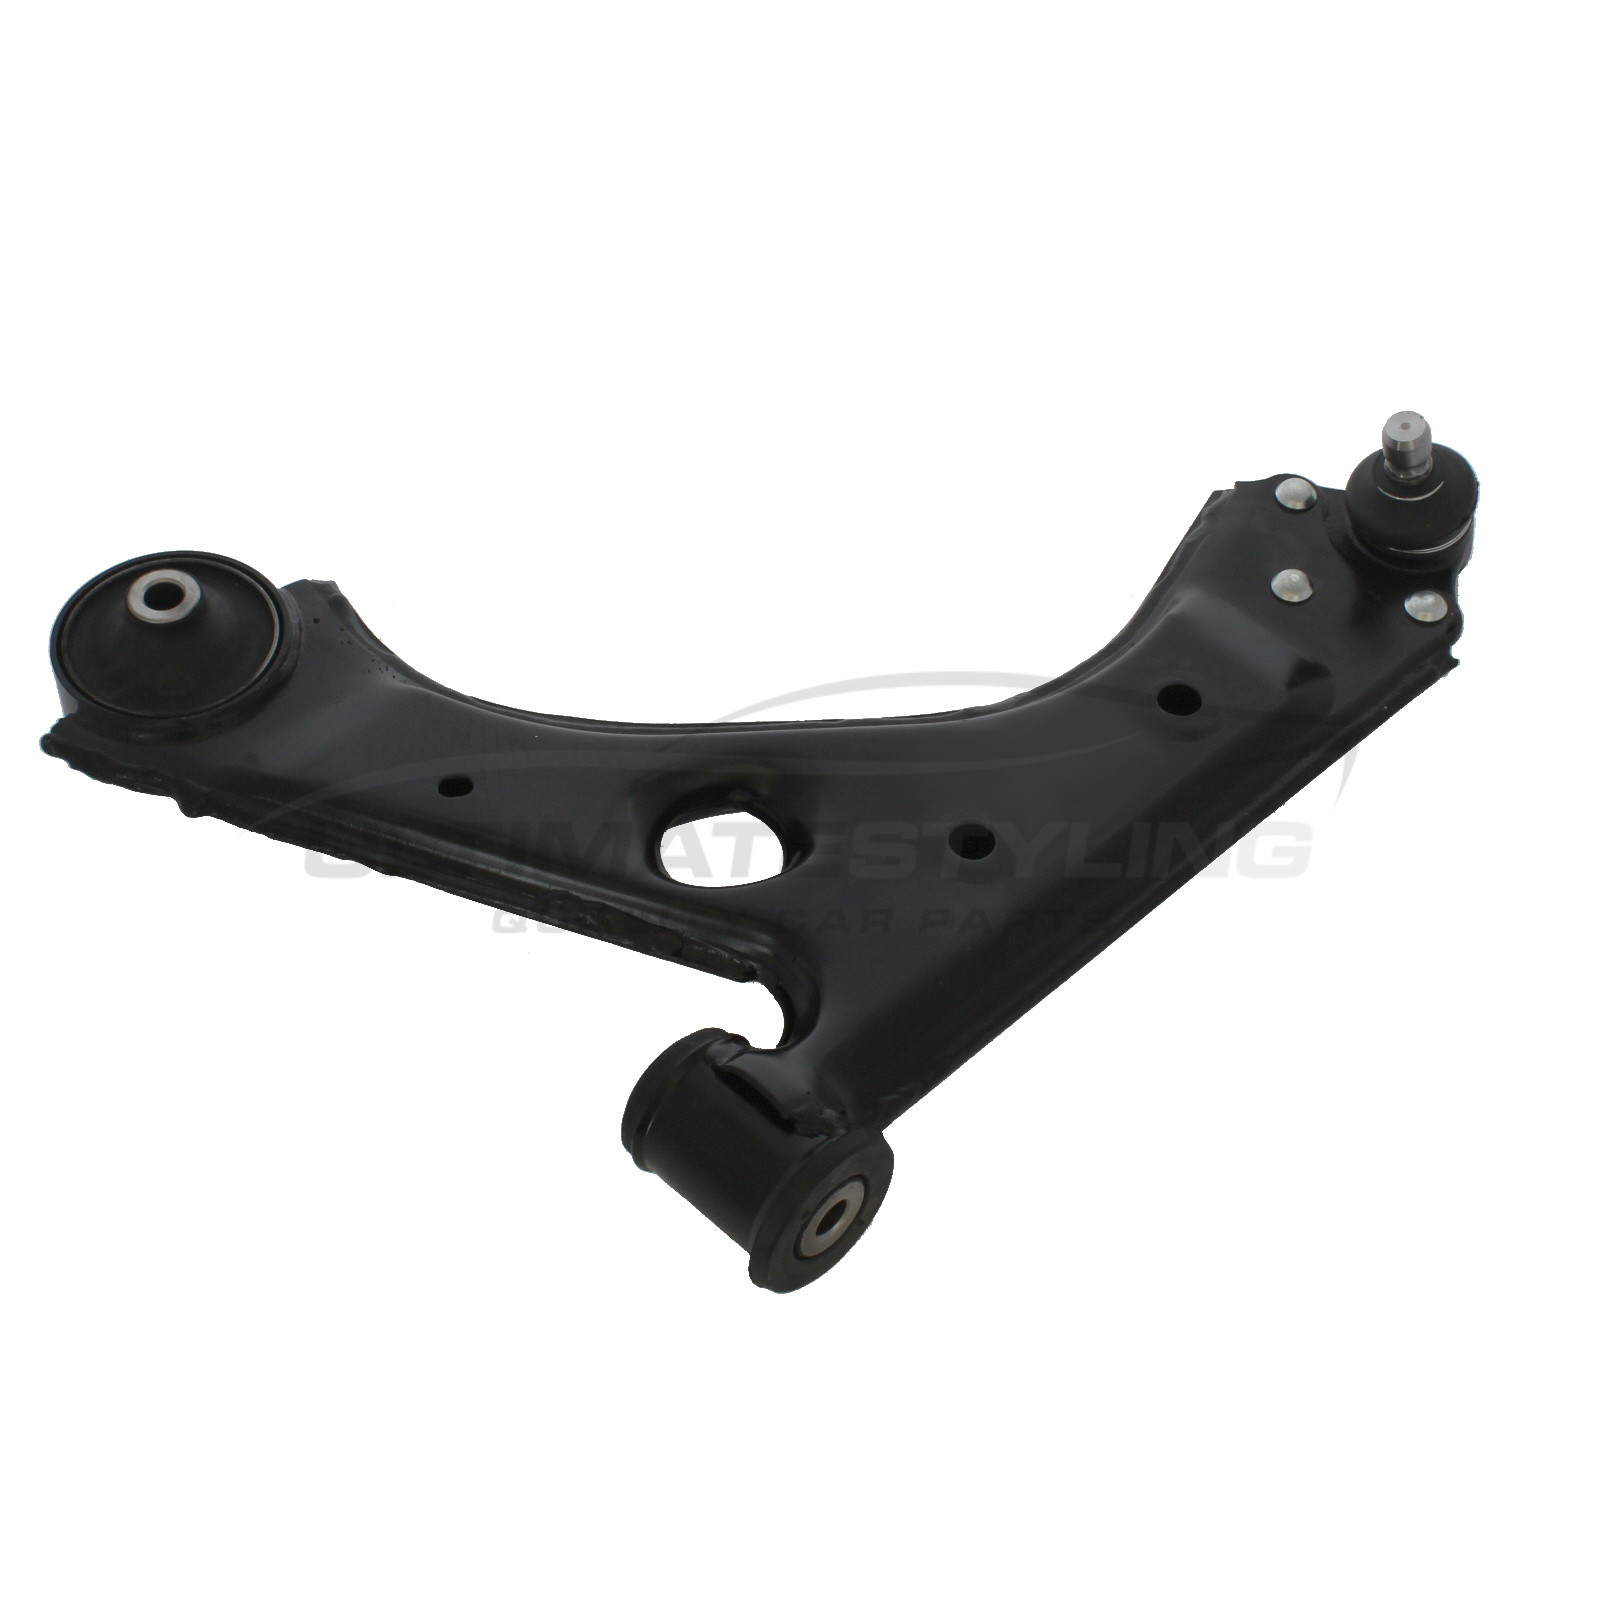 Vauxhall Adam 2012-2019, Vauxhall Corsa 2006-2015 Front Lower Suspension Arm (Steel) Including Ball Joint and Rear Bush Passenger Side (LH)